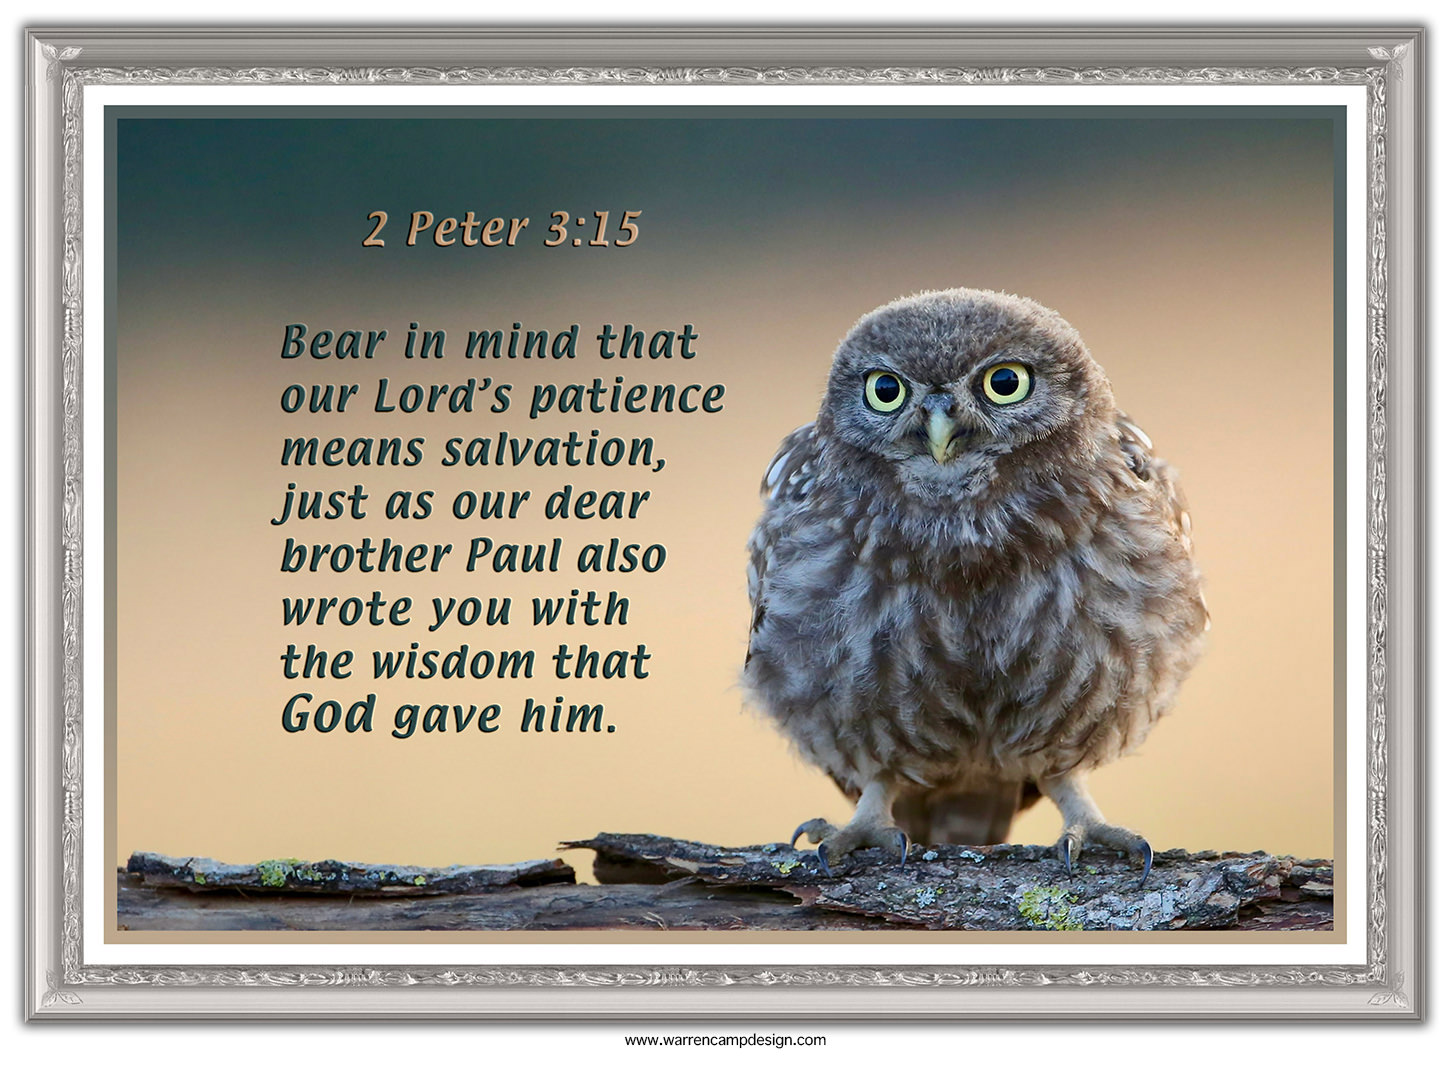 Scripture picture of 2nd Peter 3:15, emphasizing the fact that our Lord's patience will result in salvation